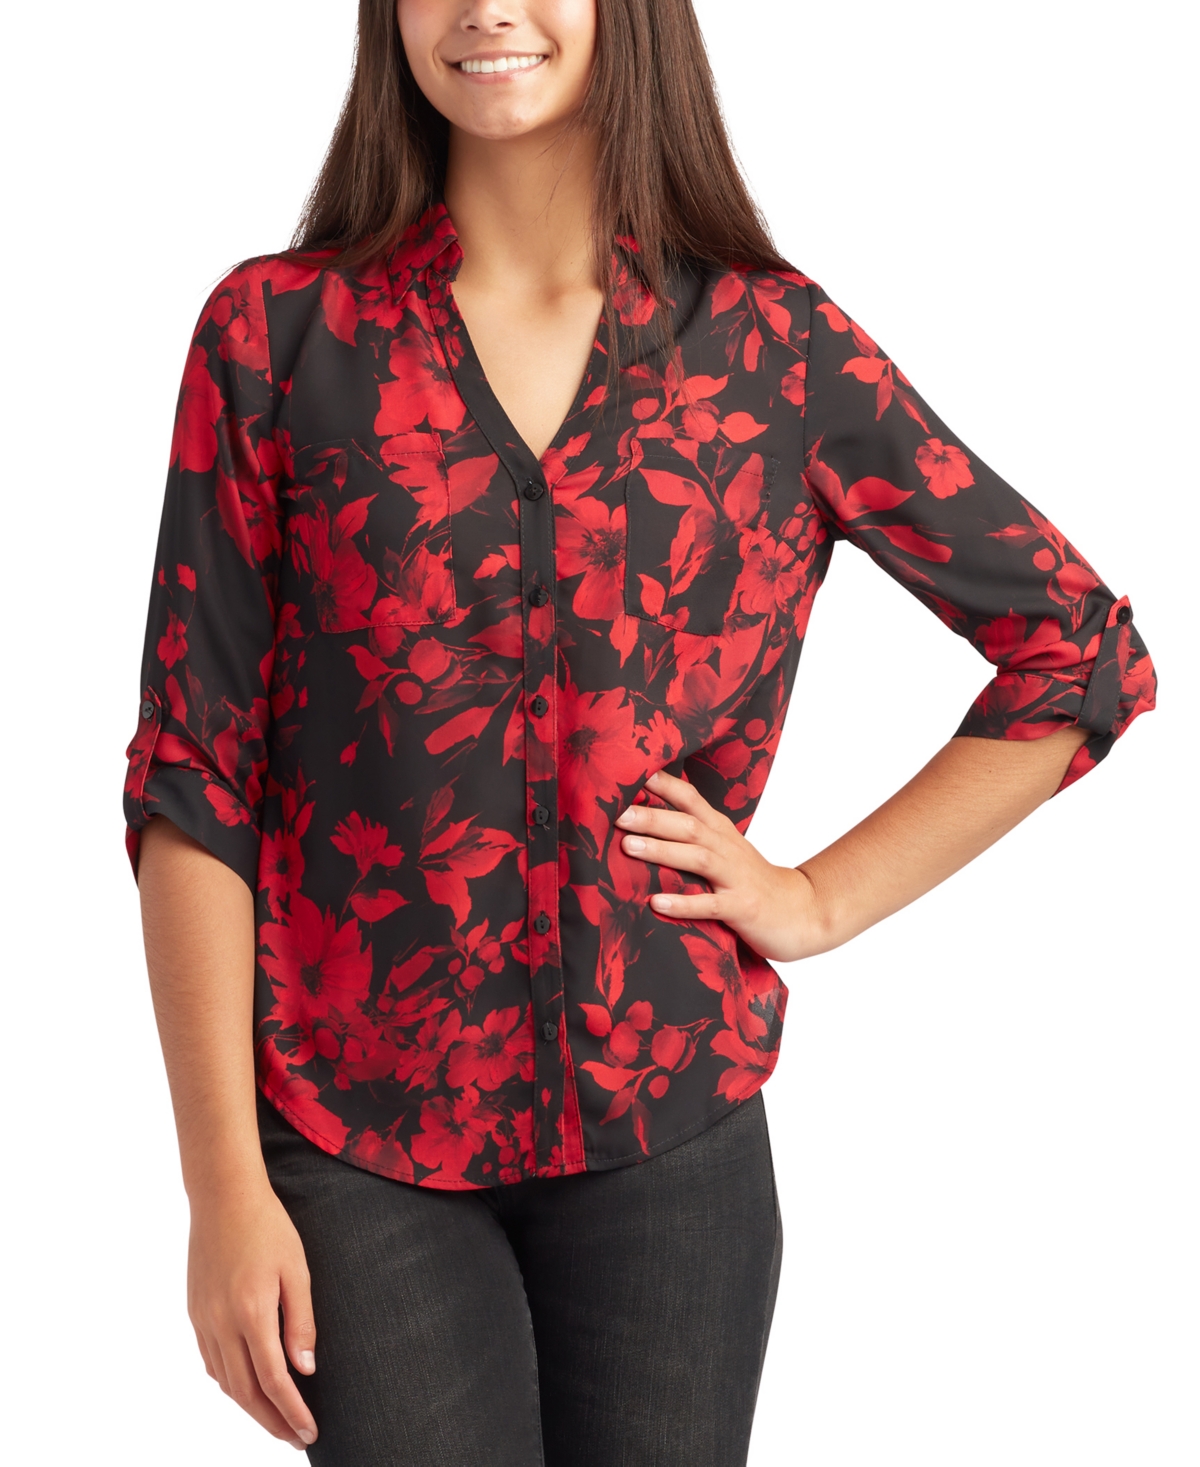 Juniors' Printed Collared V-Neck Blouse - Black Red Floral